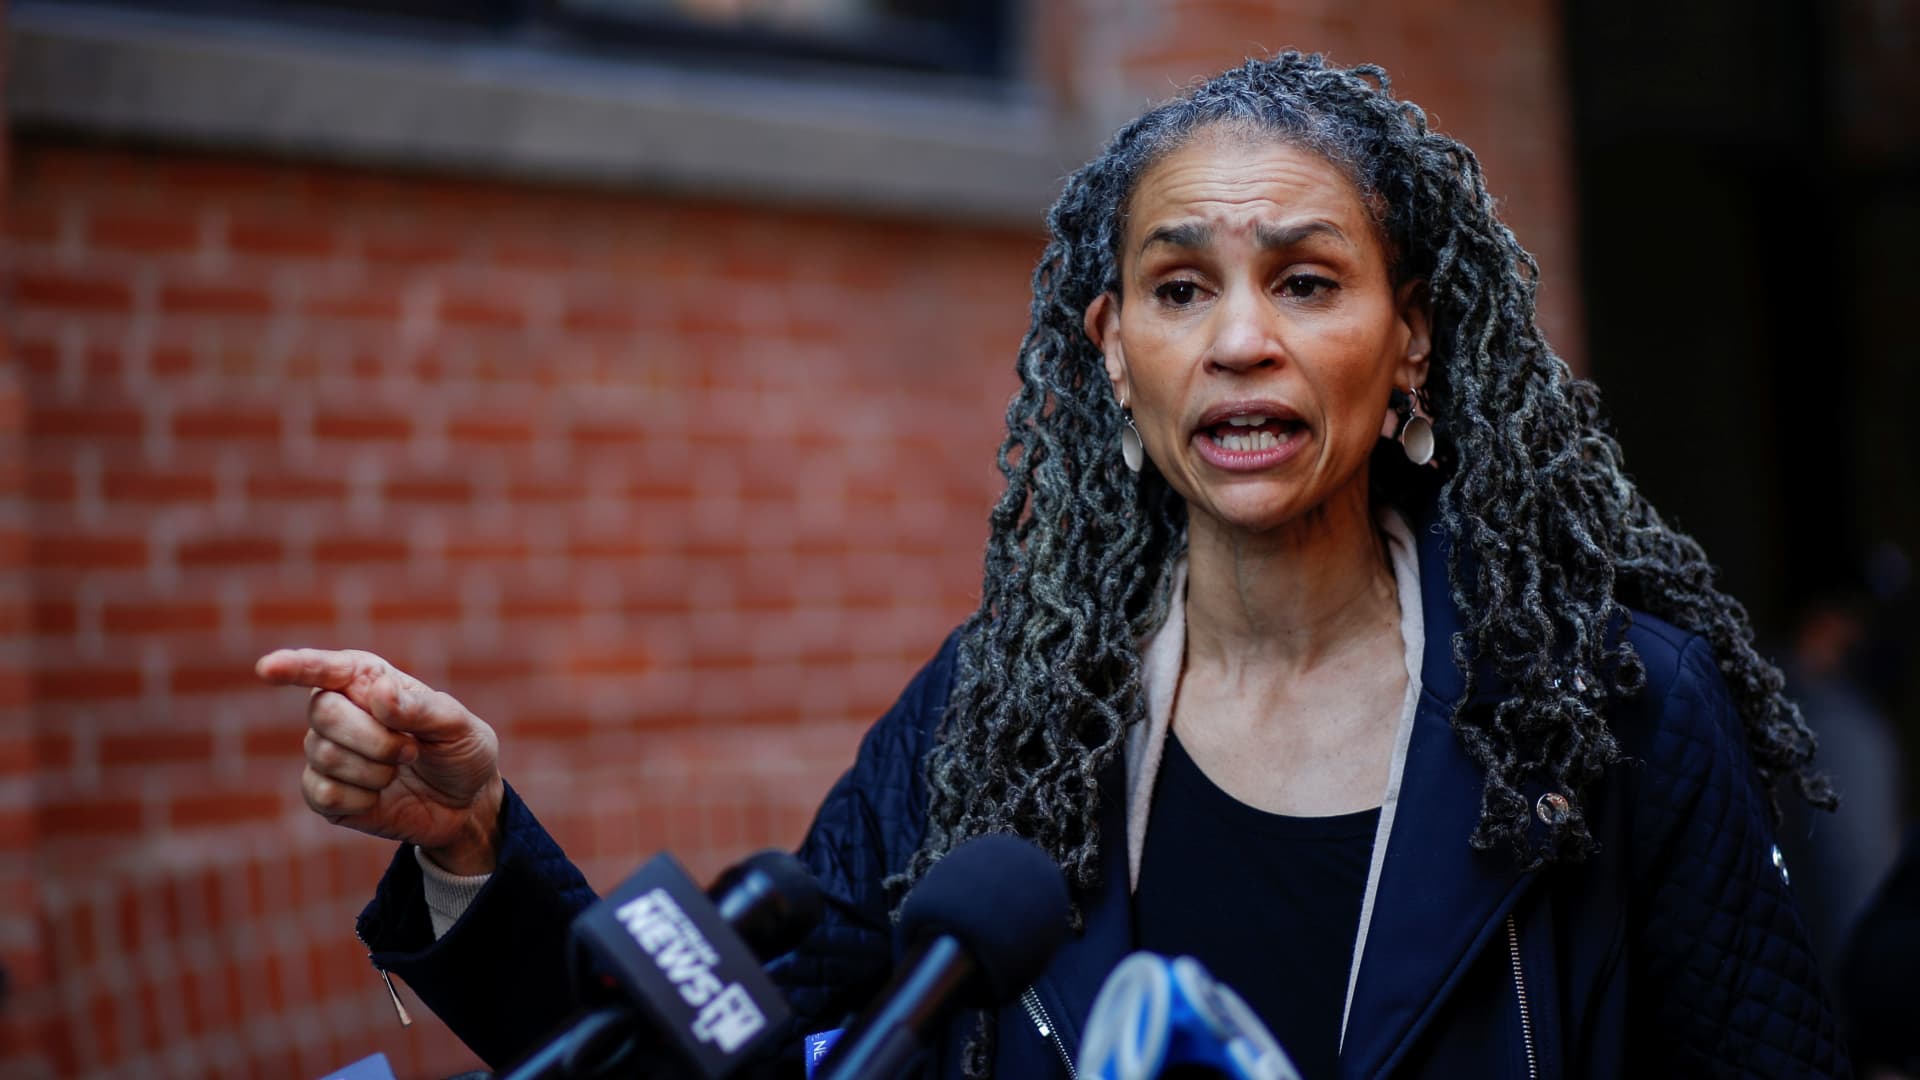 Maya Wiley, a Democratic candidate for mayor of New York City, speaks during a news conference with Andrew Yang, who also runs for the post, as they campaign in Brooklyn, New York, March 11, 2021.